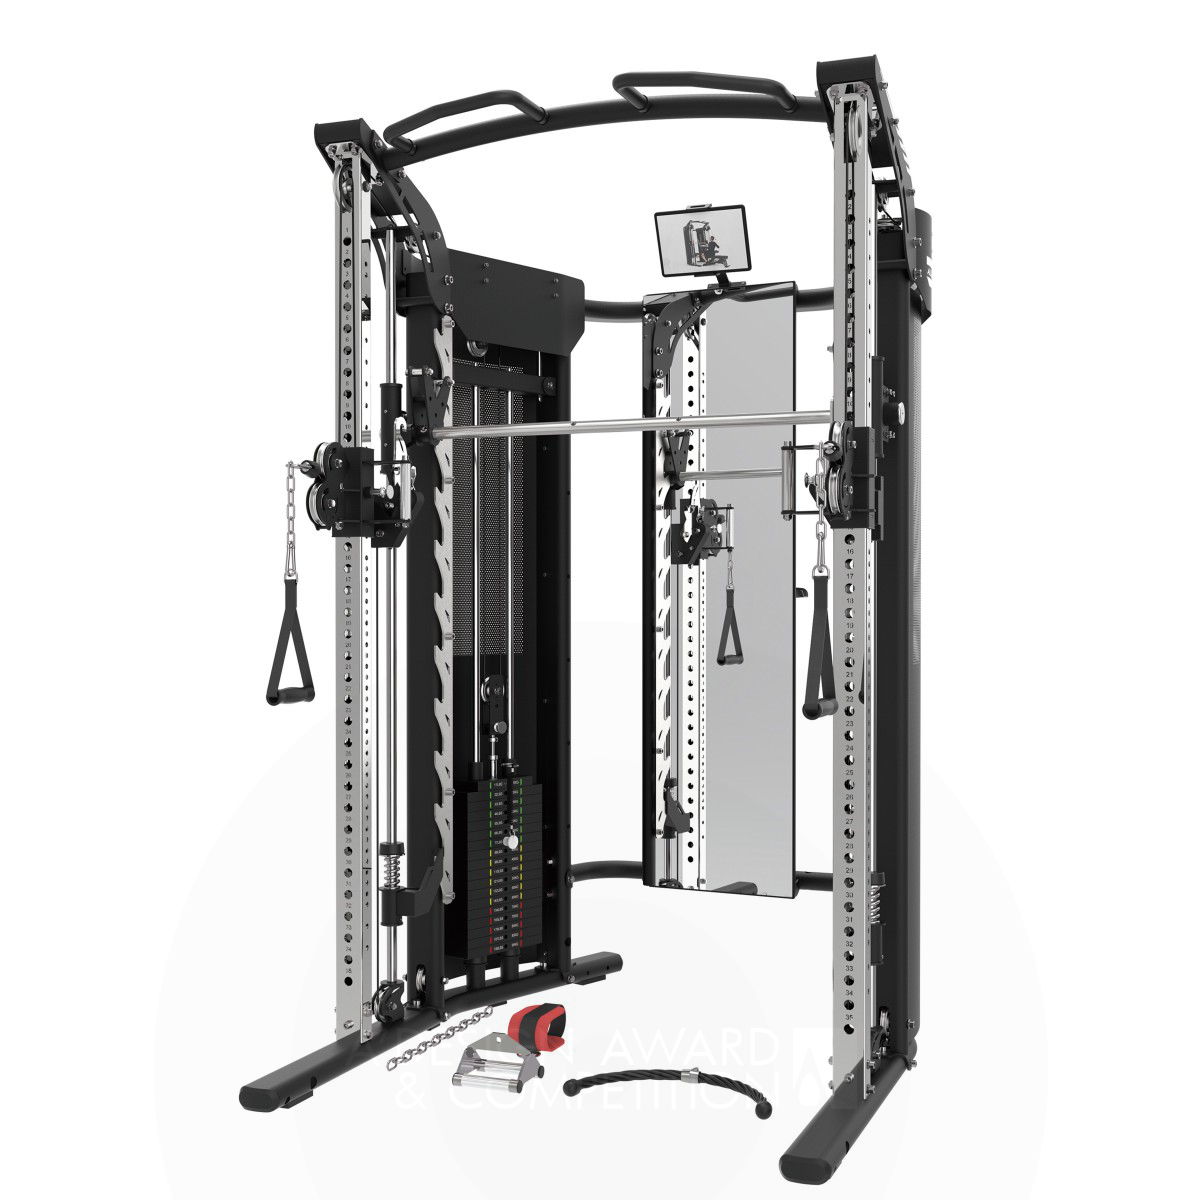 IBL-FT900H Ultra Smith Machine by Jichun Du Silver Sporting Goods, Fitness and Recreation Equipment Design Award Winner 2024 